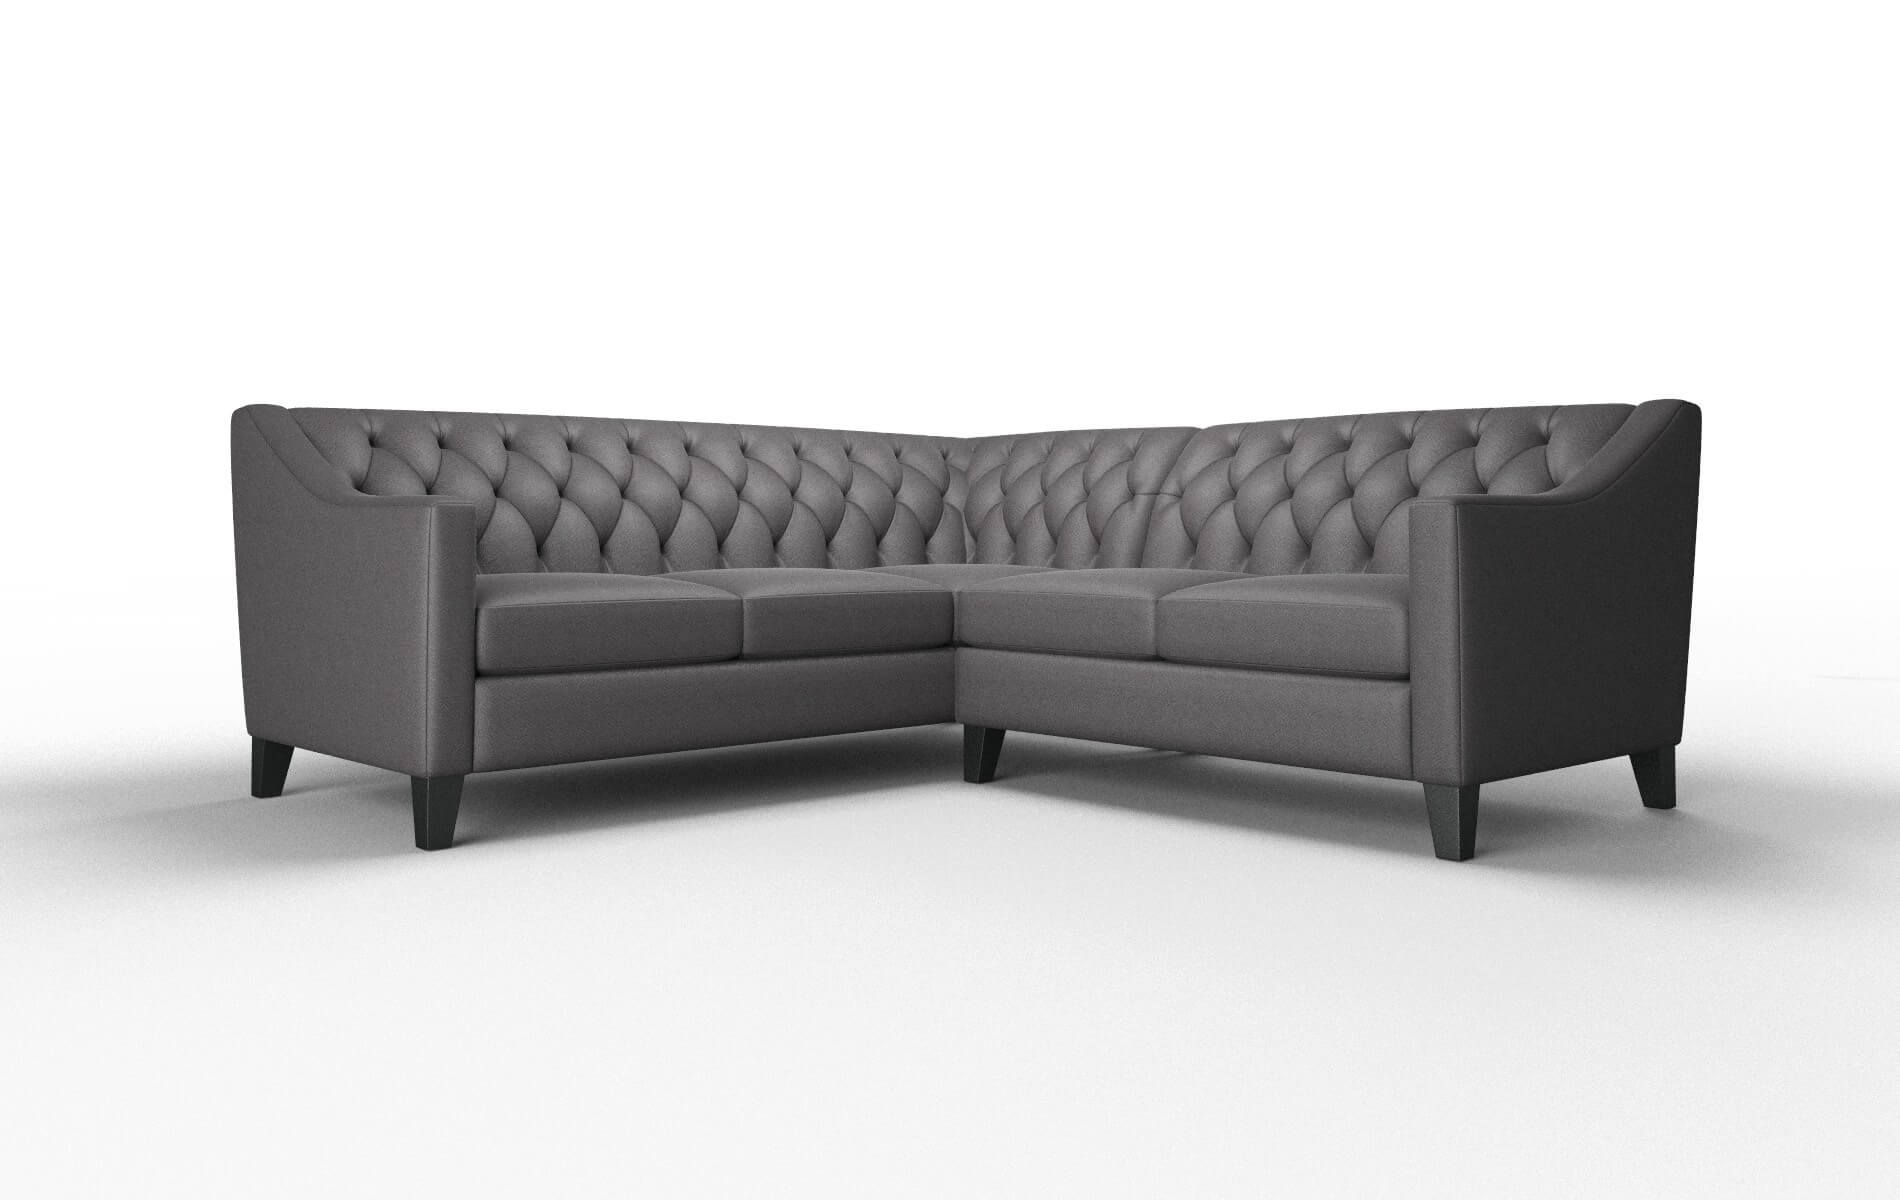 Seville Catalina Charcoal Sectional espresso legs